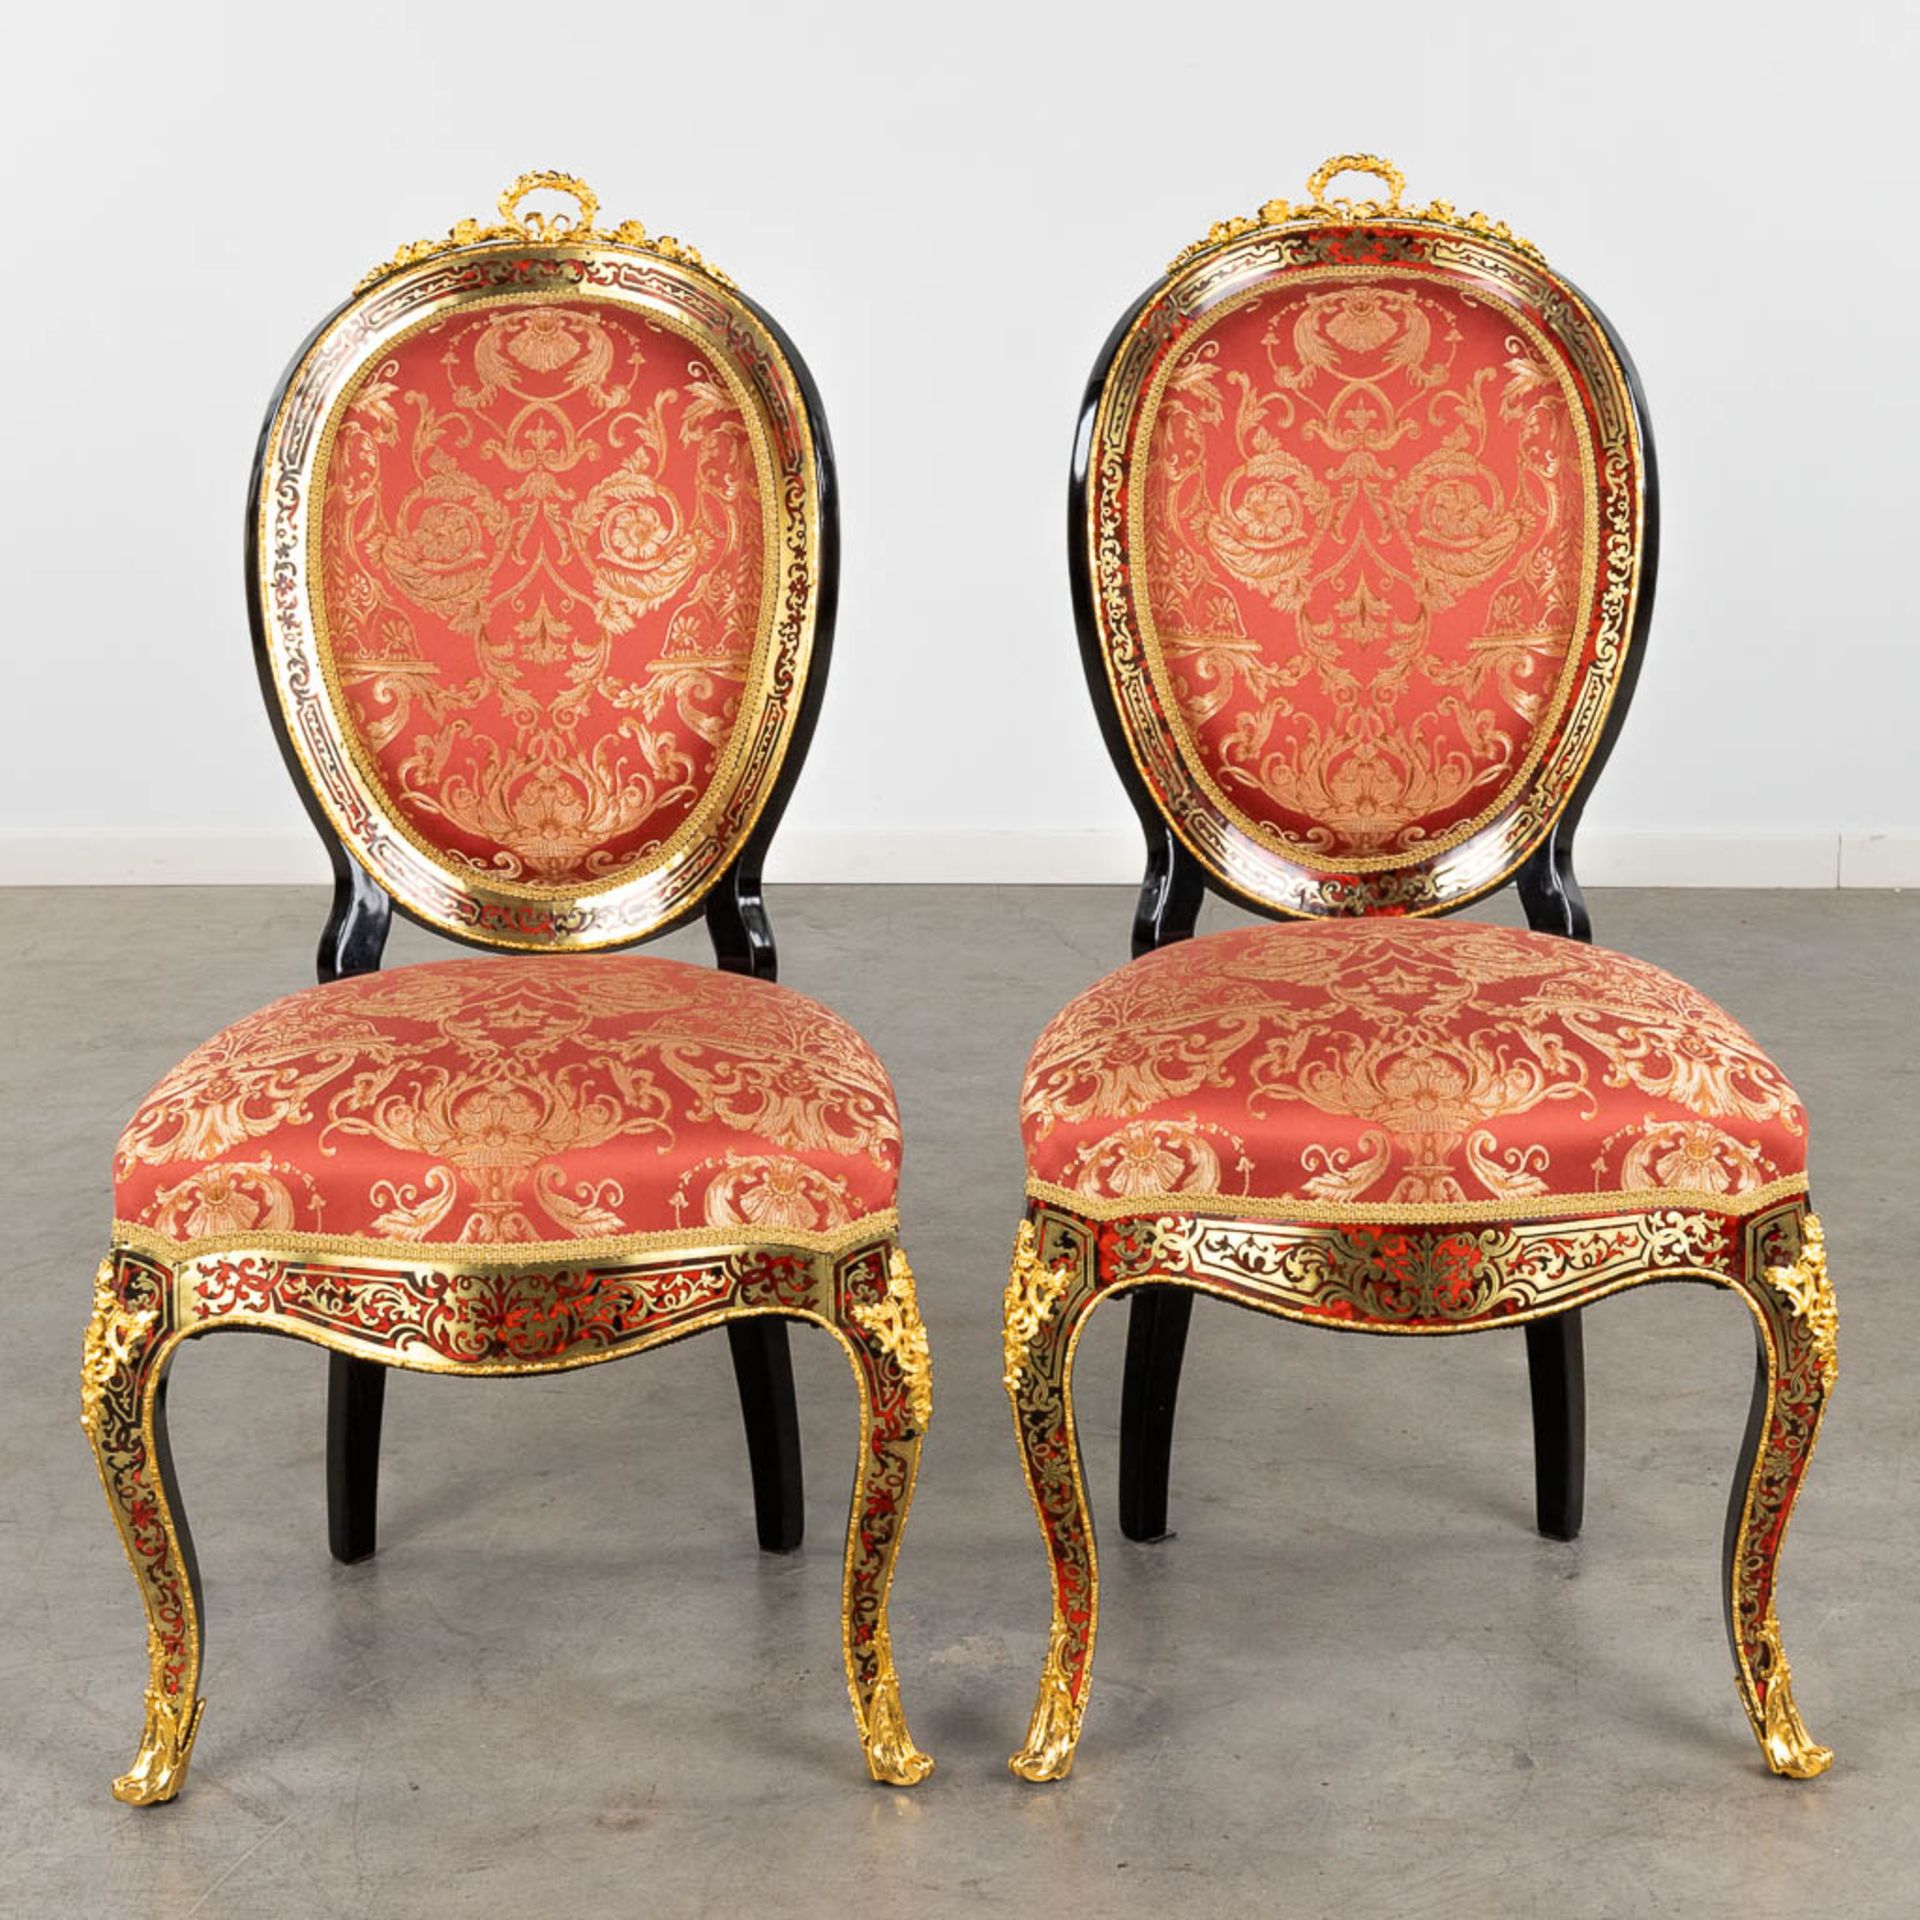 A pair of Chairs, Boulle technique, tortoise shell and copper inlay, Napoleon 3, 19th C. (D:56 x W:5 - Image 3 of 14